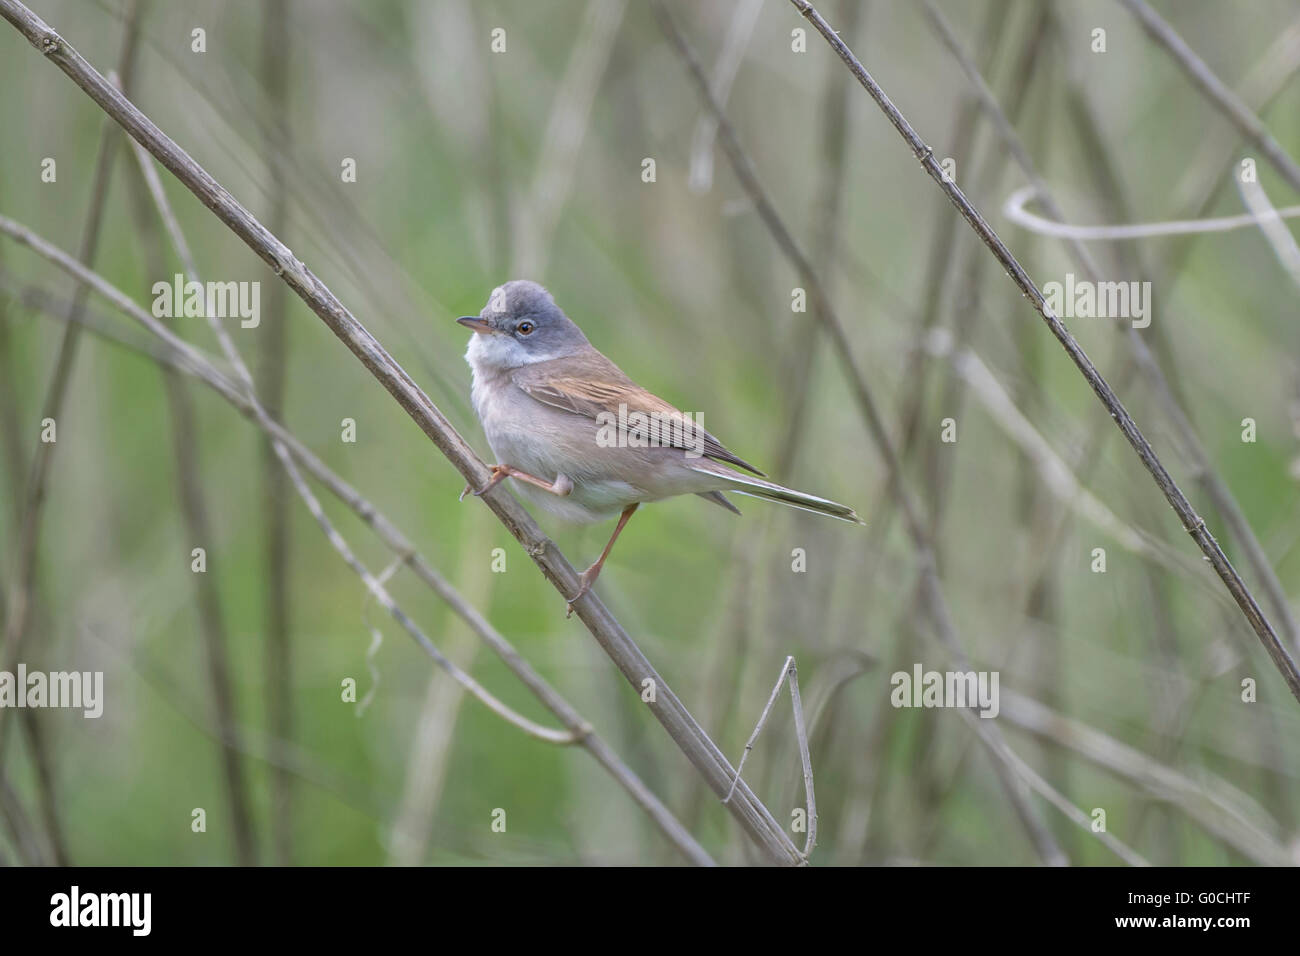 Whitethroat bird perched on a reed in the undergrowth Stock Photo